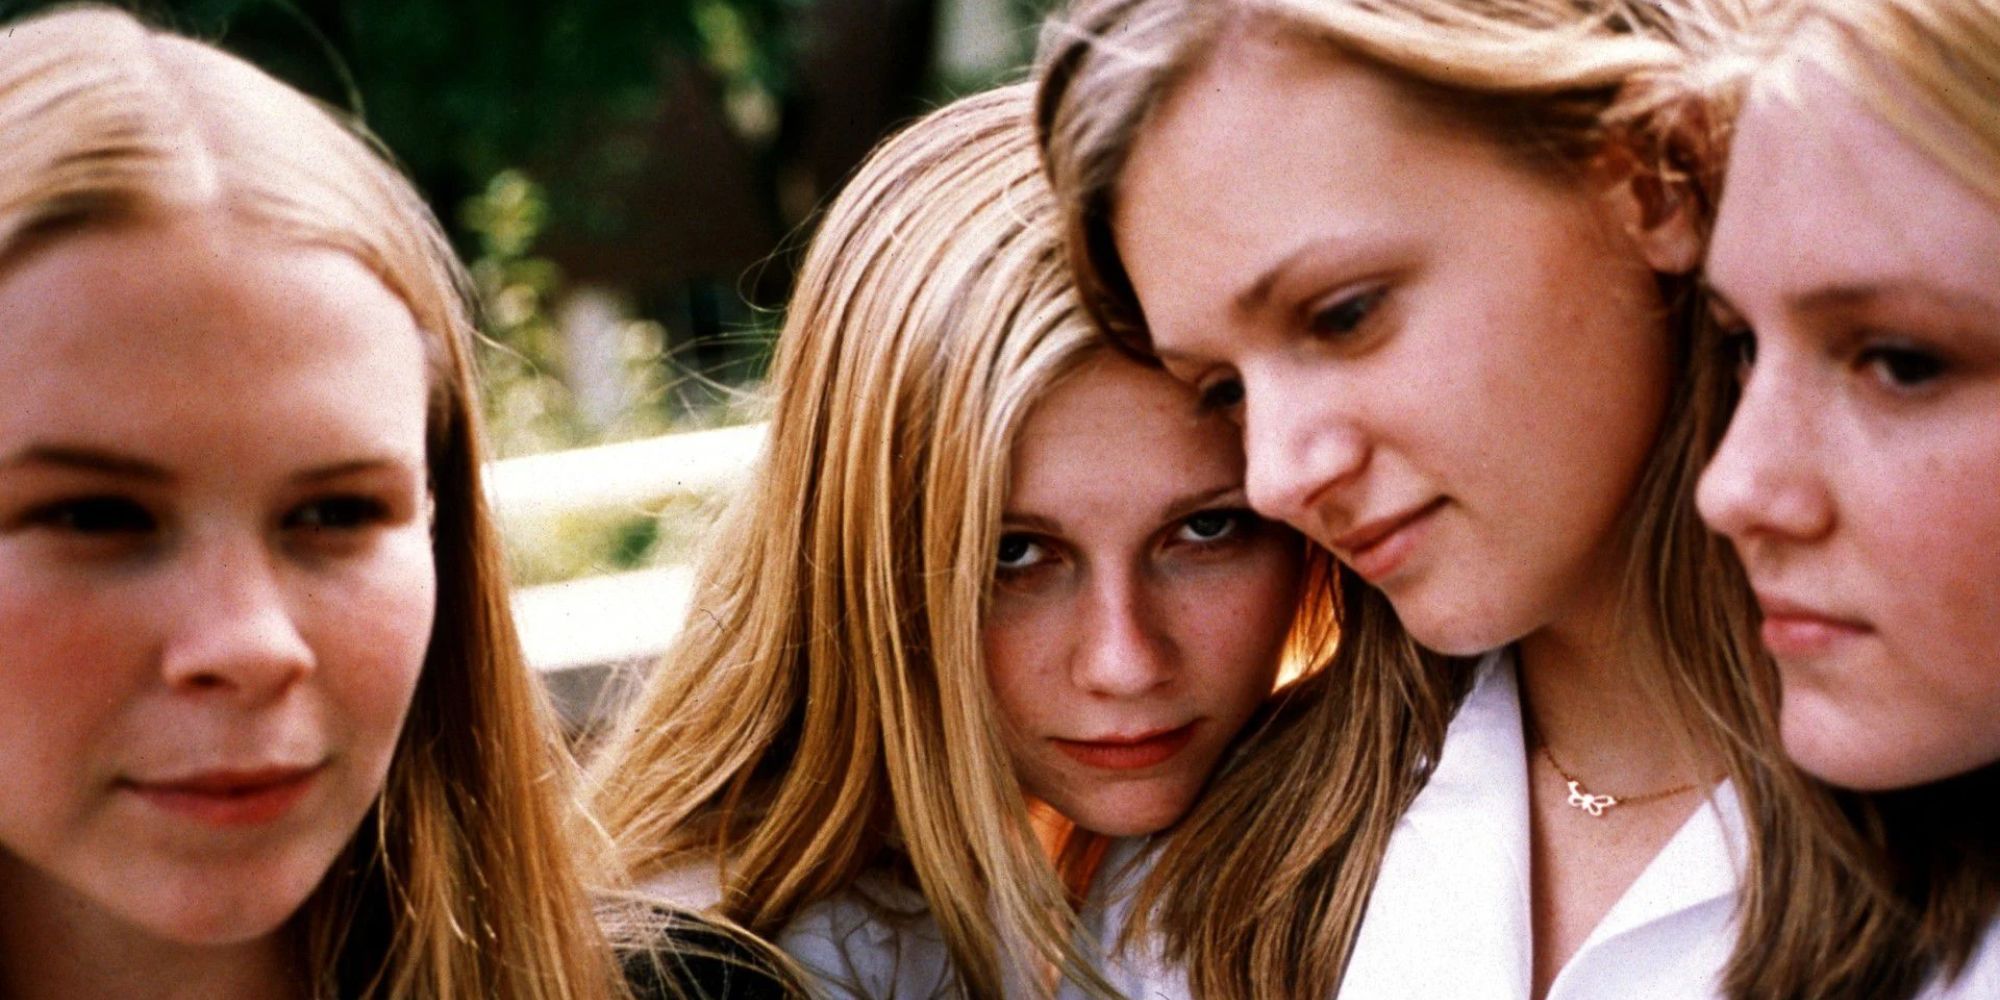 Kirsten Dunst, A. J. Cook, Chelse Swain and Hanna R. Hall as the Lisbon sisters in The Virgin Suicides